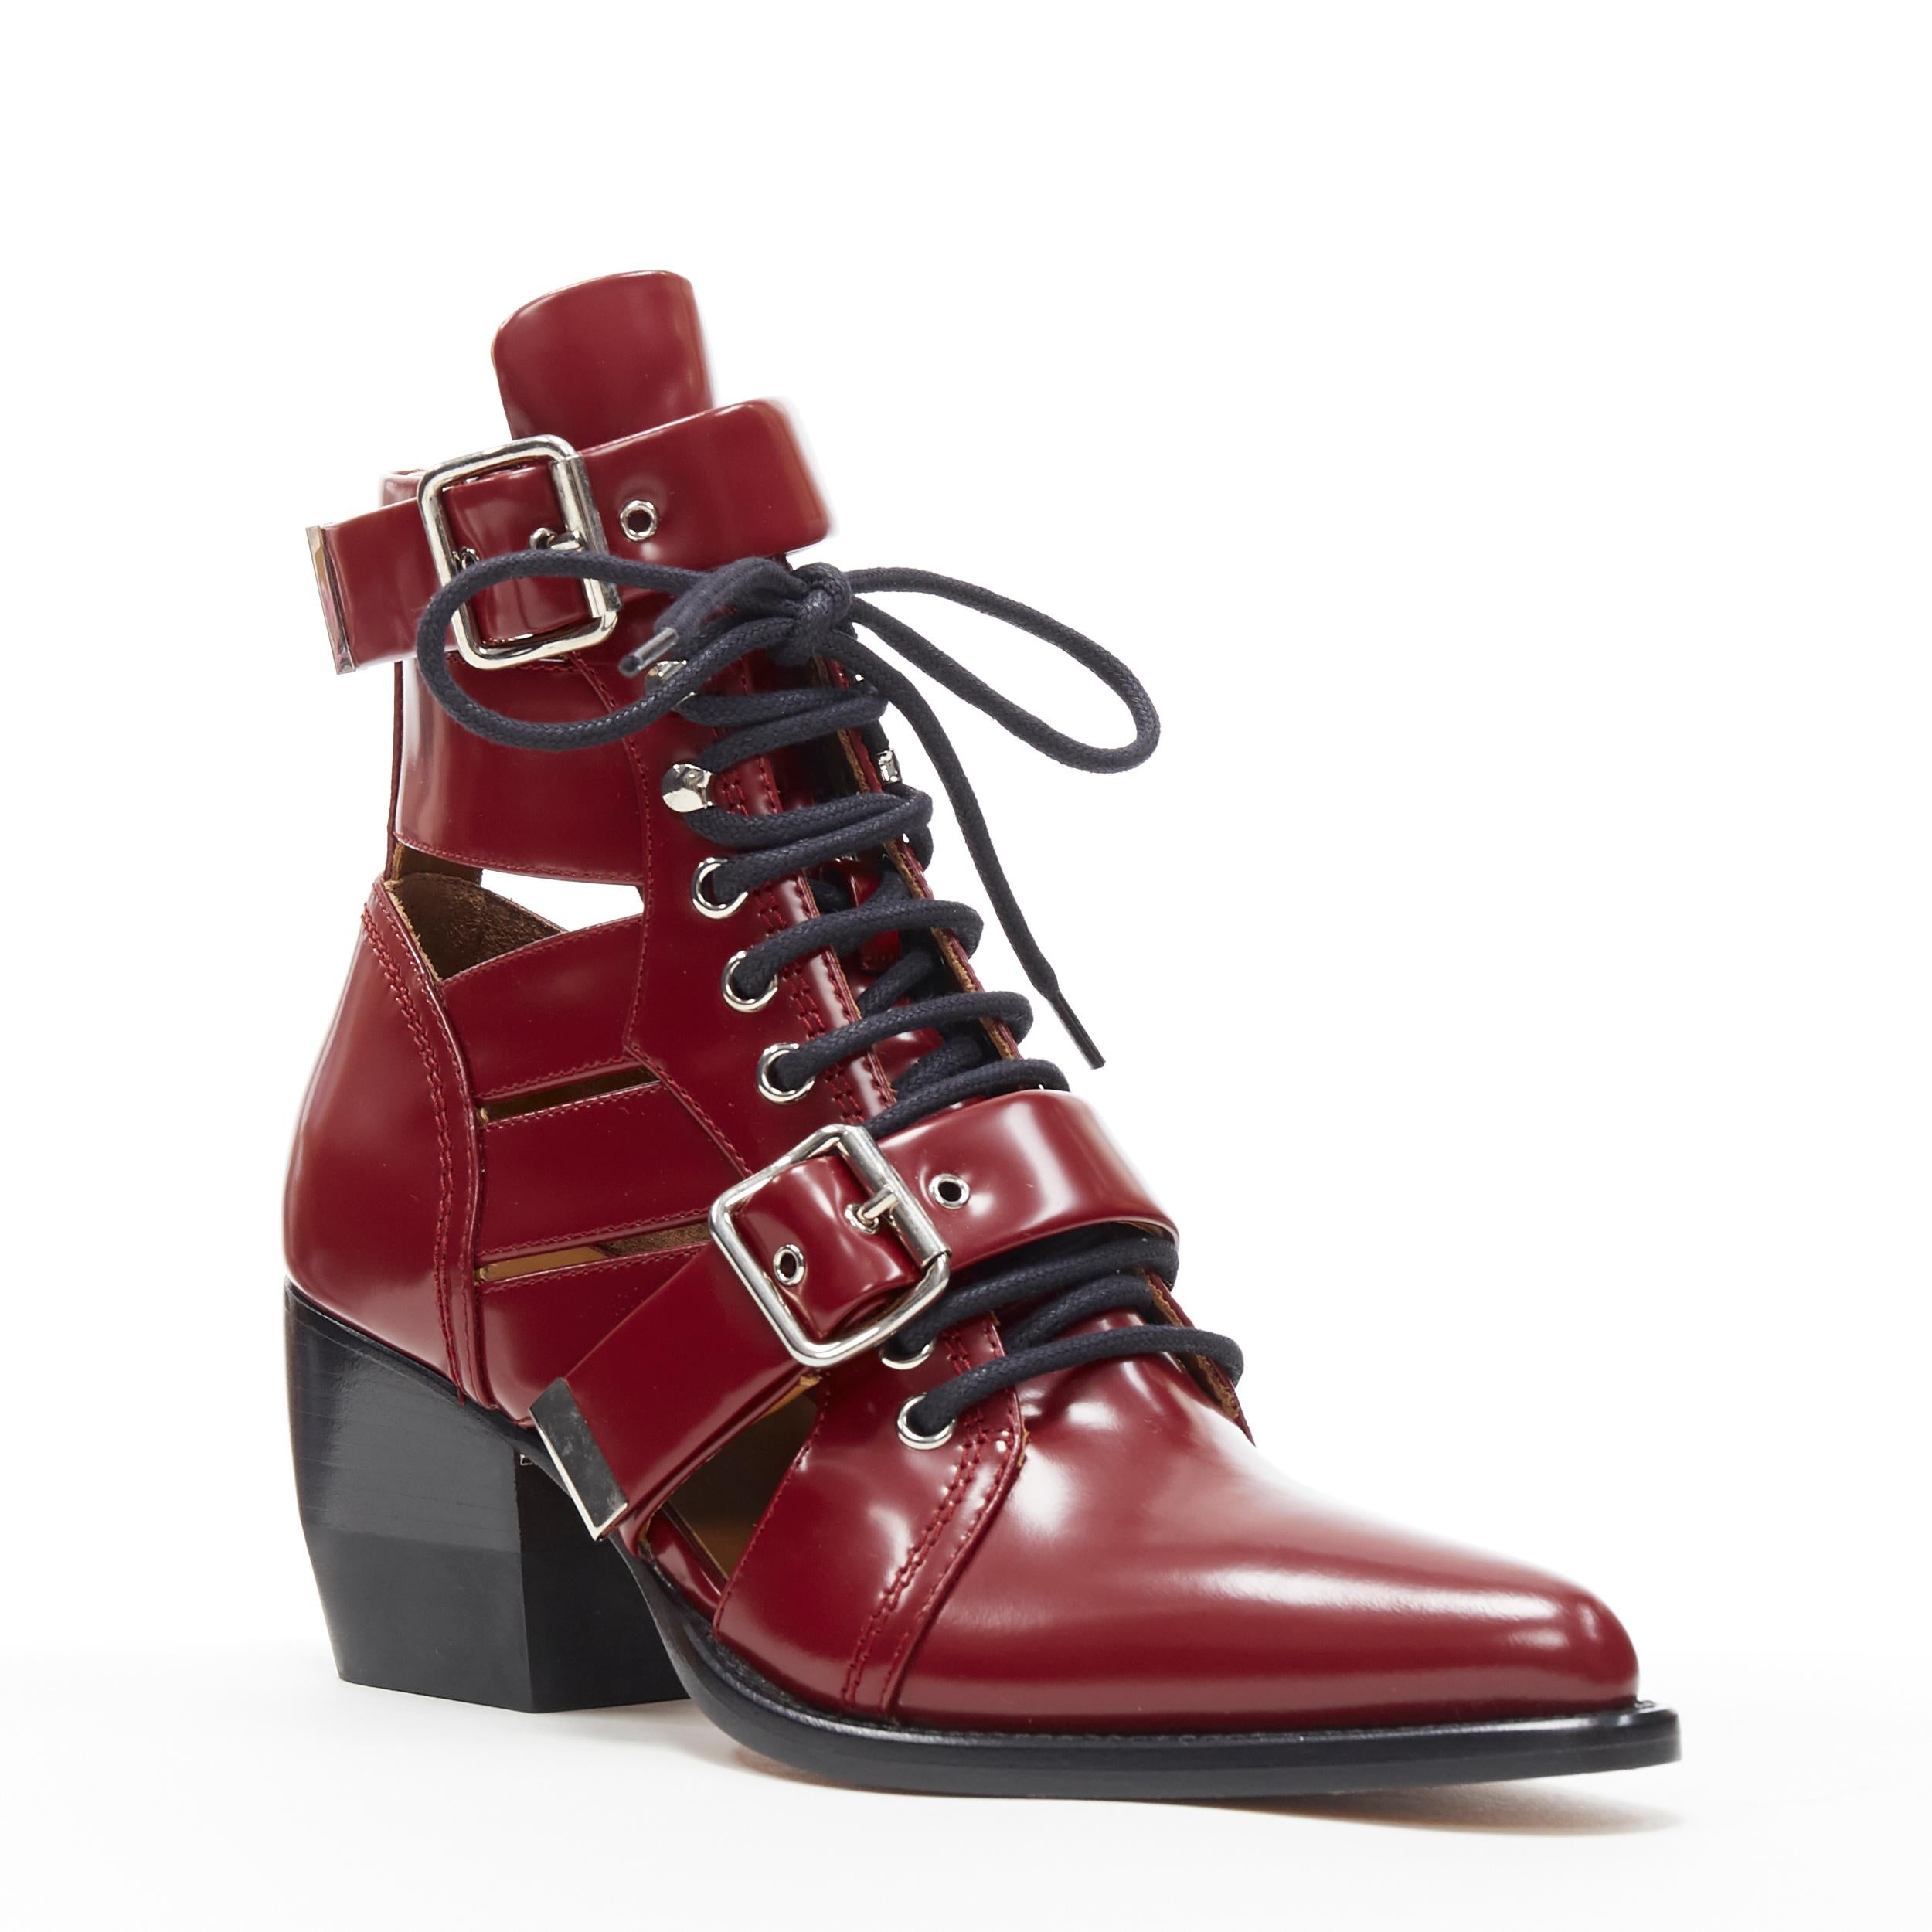 new CHLOE Rylee burgundy red leather cut out buckled pointy ankle boot EU37
Brand: Chloe
Model Name / Style: Rylee
Material: Leather
Color: Burgundy
Pattern: Solid
Closure: Lace up
Extra Detail: Signature Rylee boots by Chloe. Runway style. Ankle